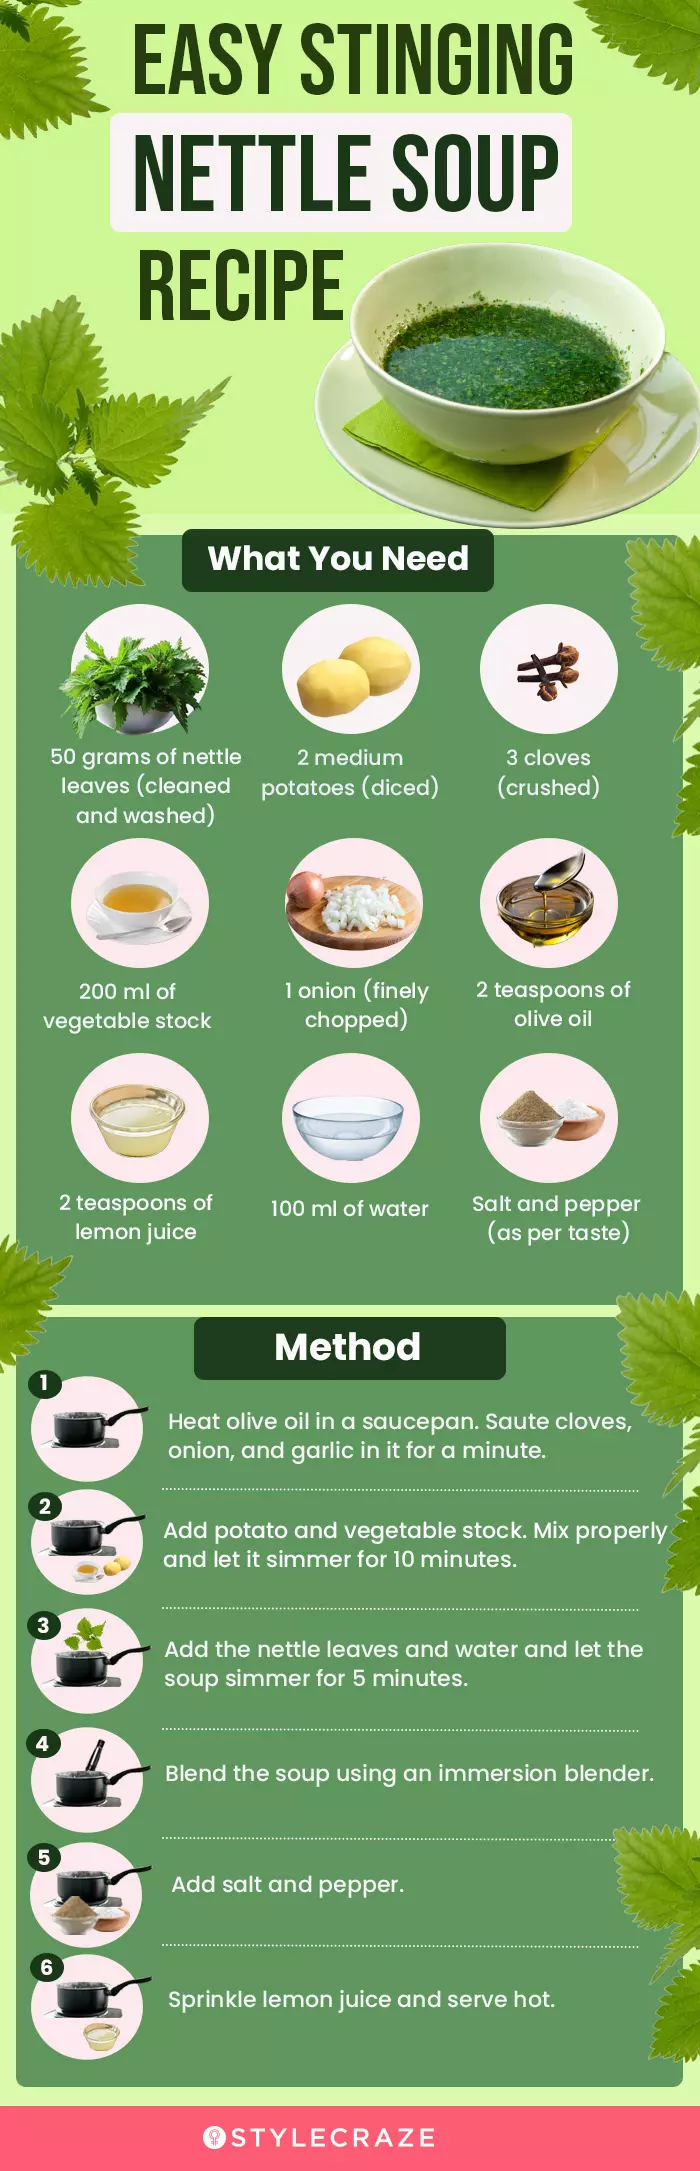 easy stinging nettle soup recipe (infographic)